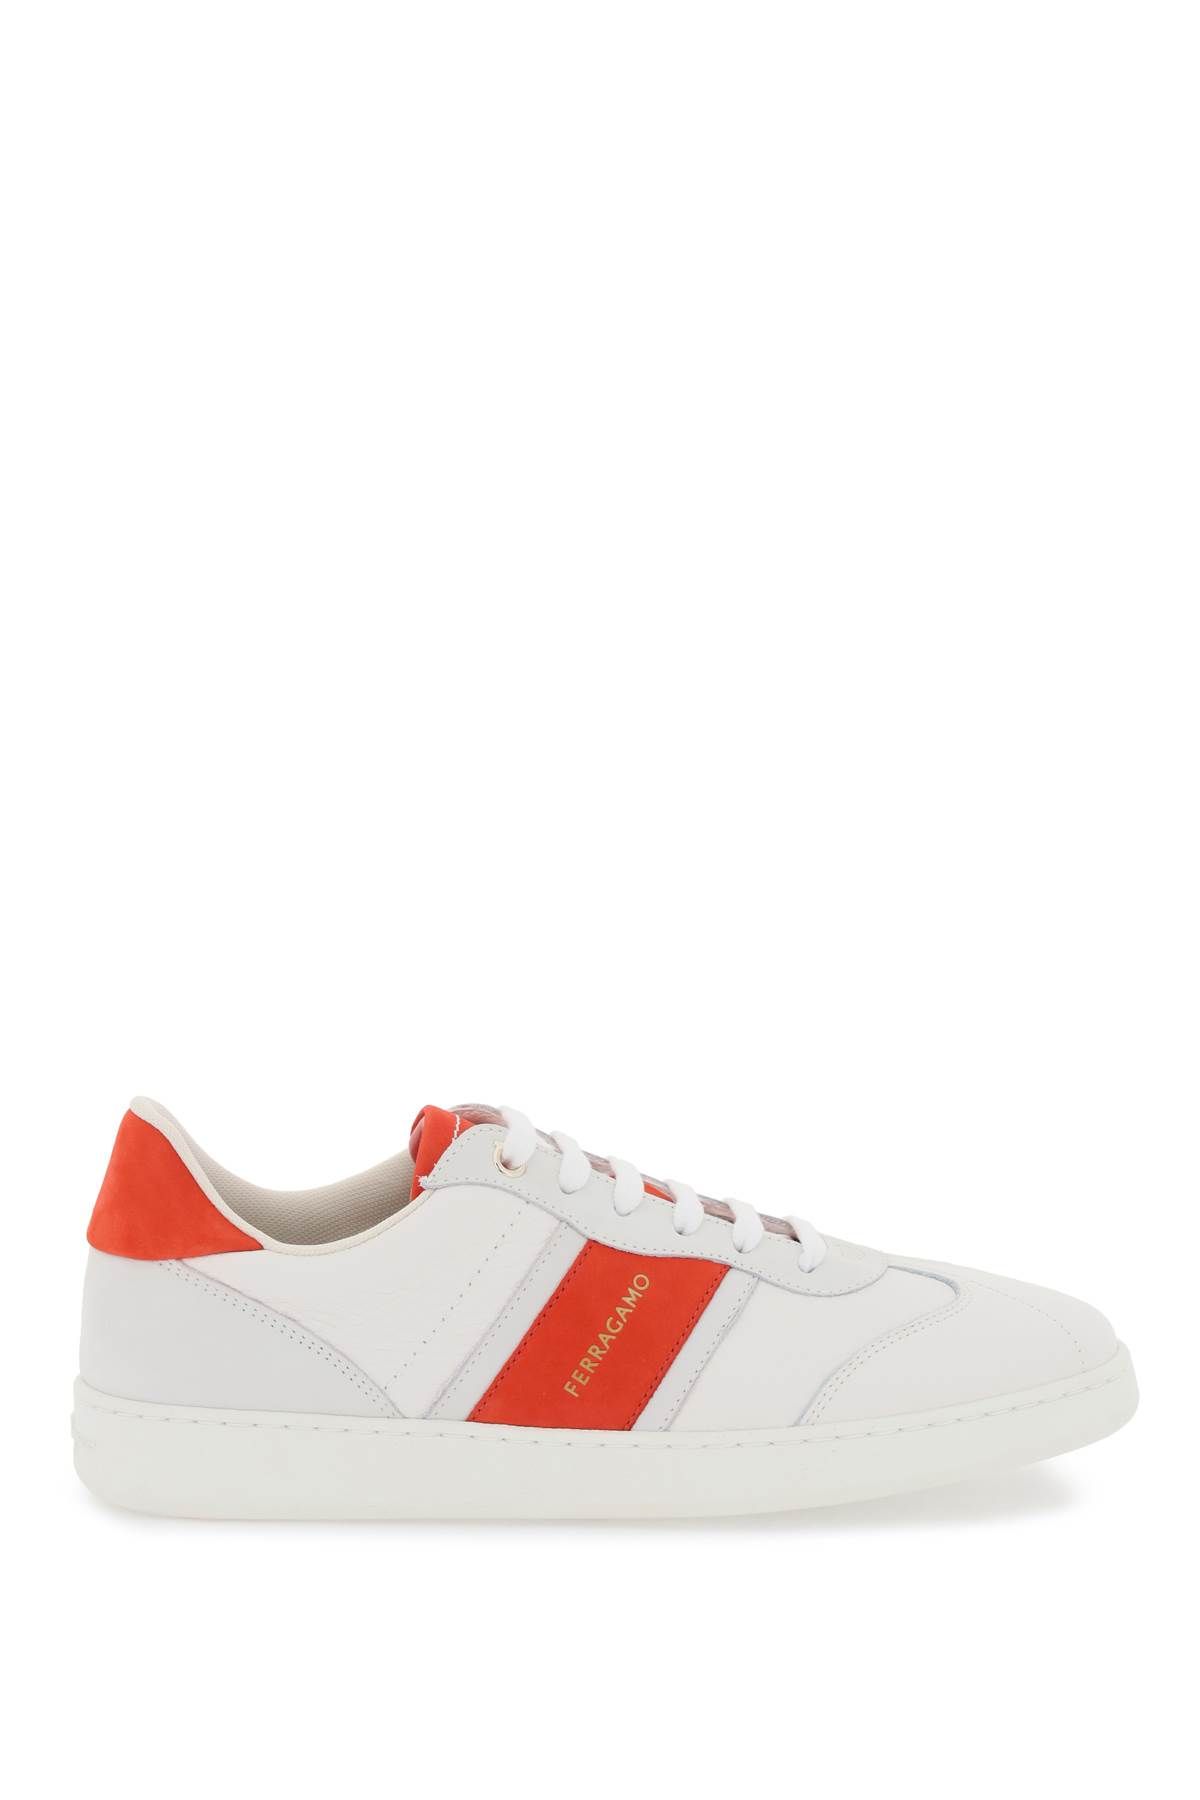 Ferragamo Leather Sneakers In White,grey,red